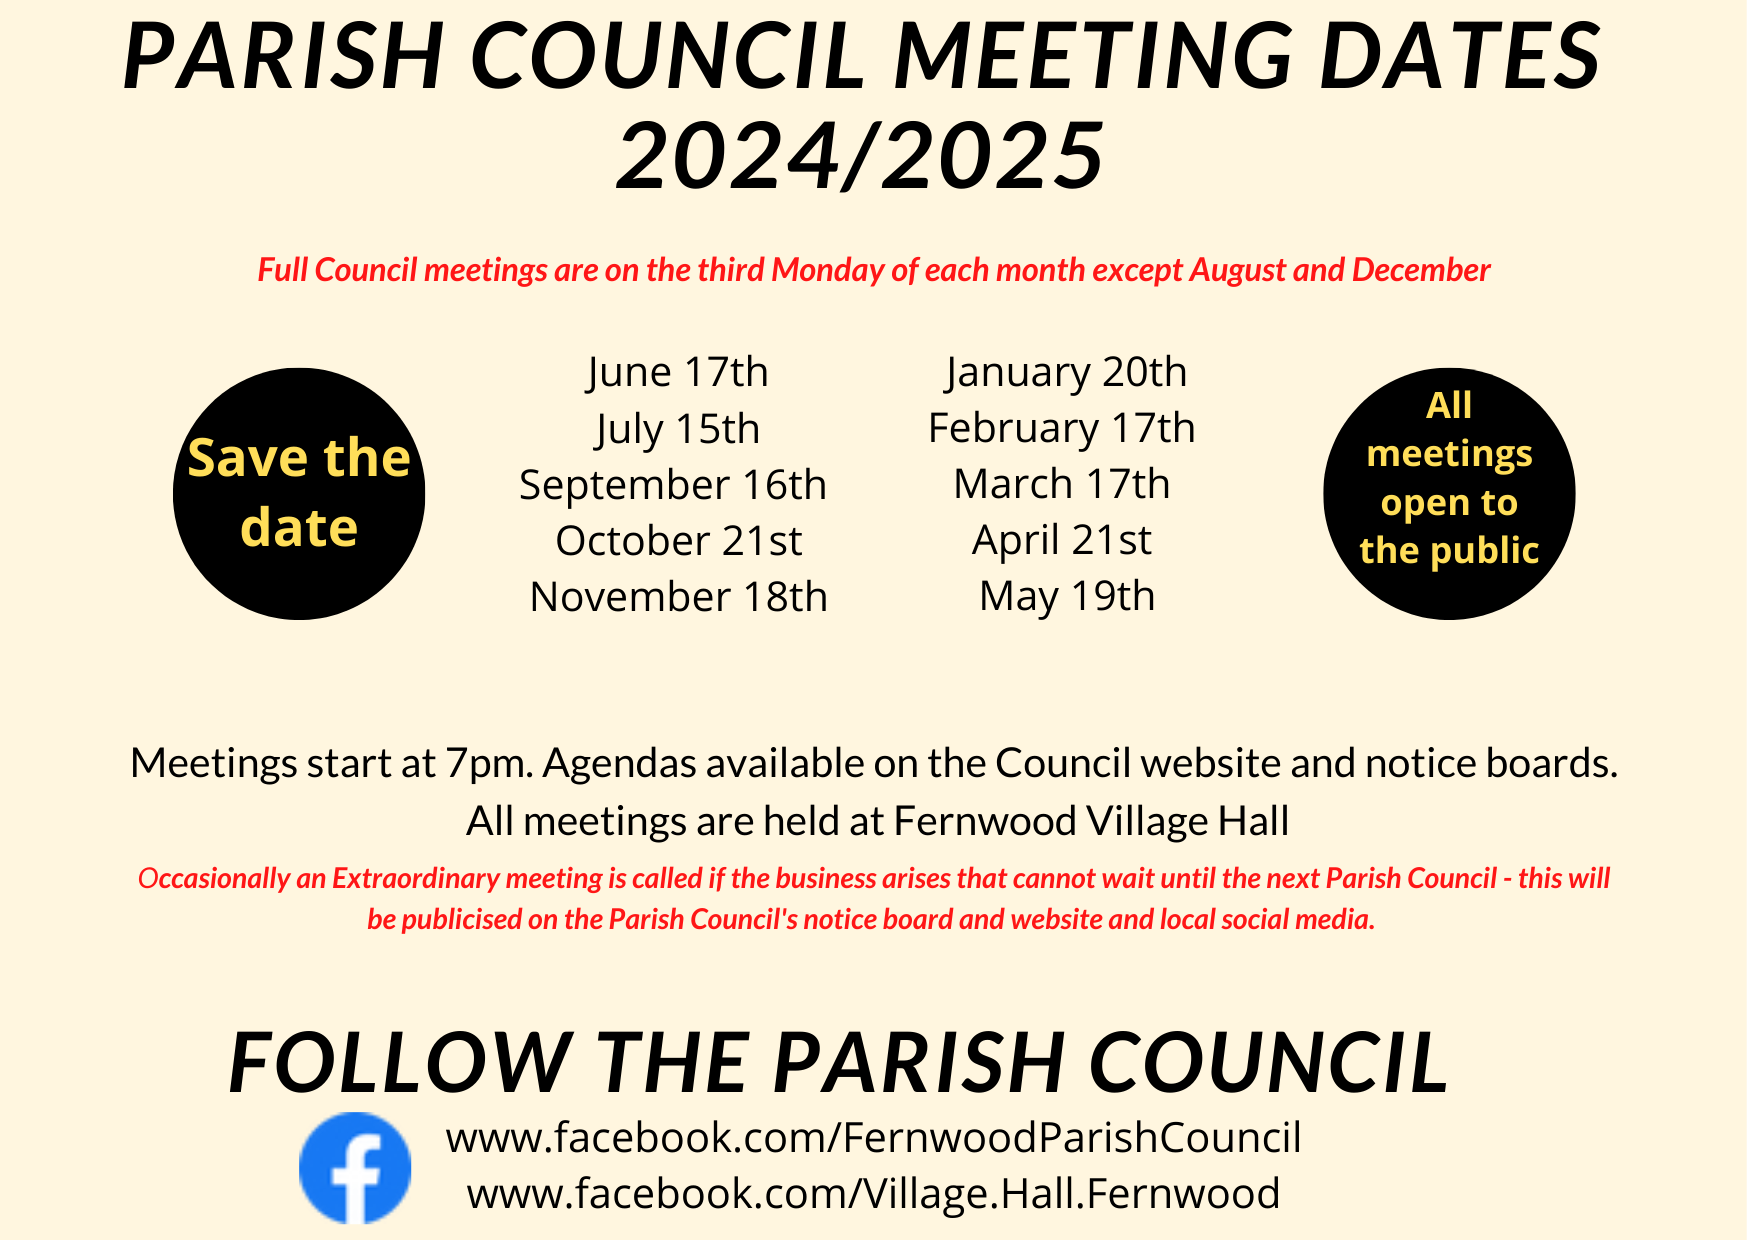 All meetings open to the public.